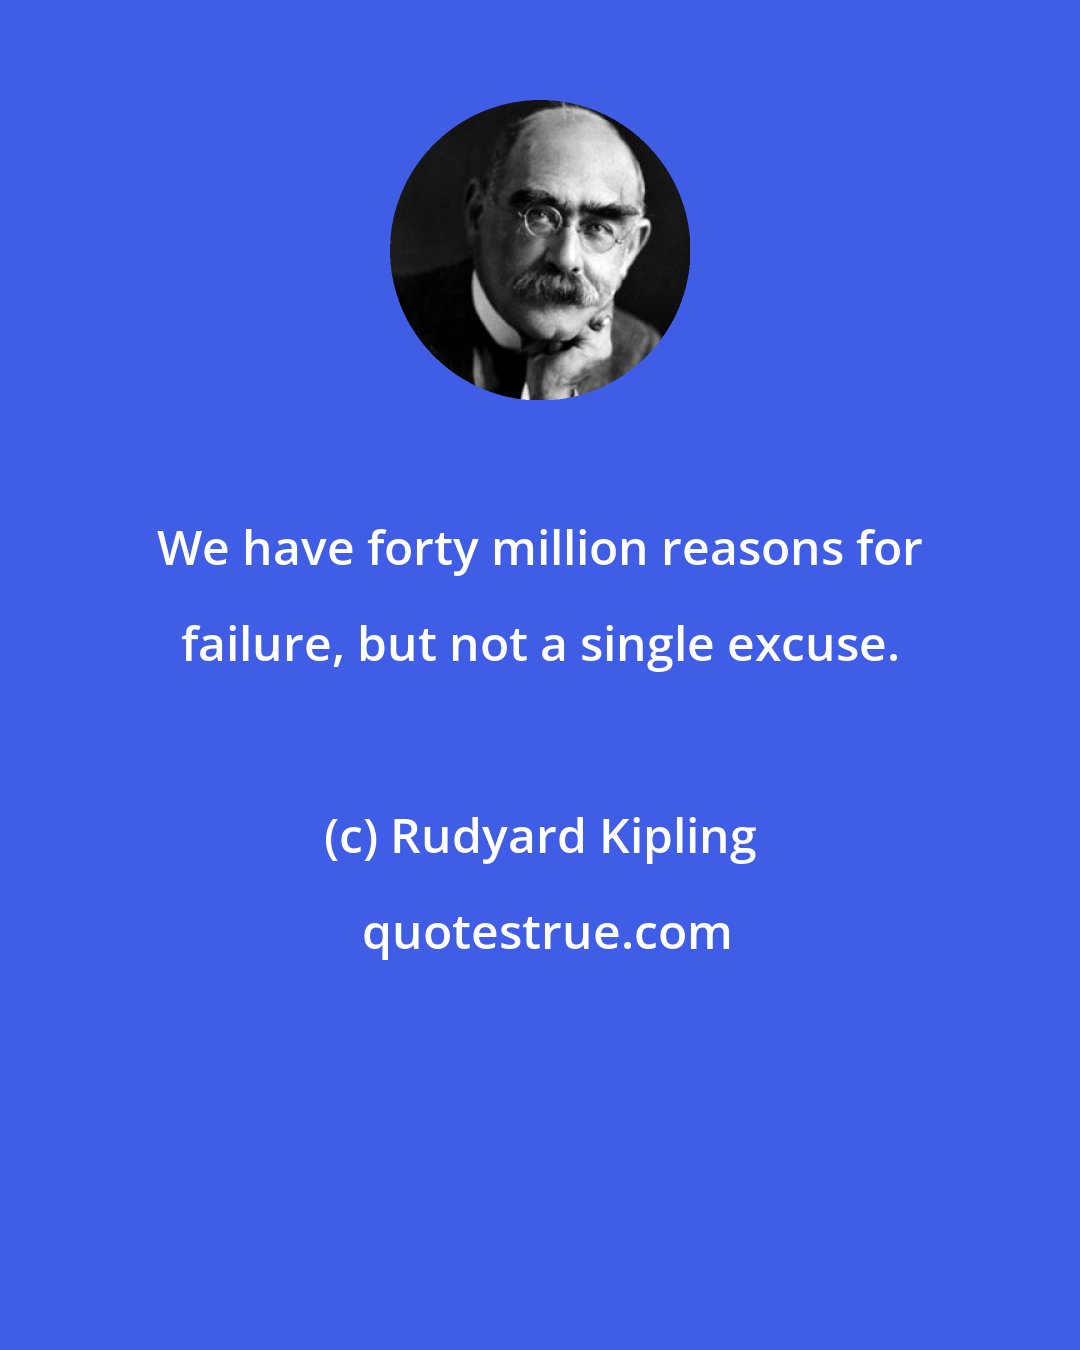 Rudyard Kipling: We have forty million reasons for failure, but not a single excuse.